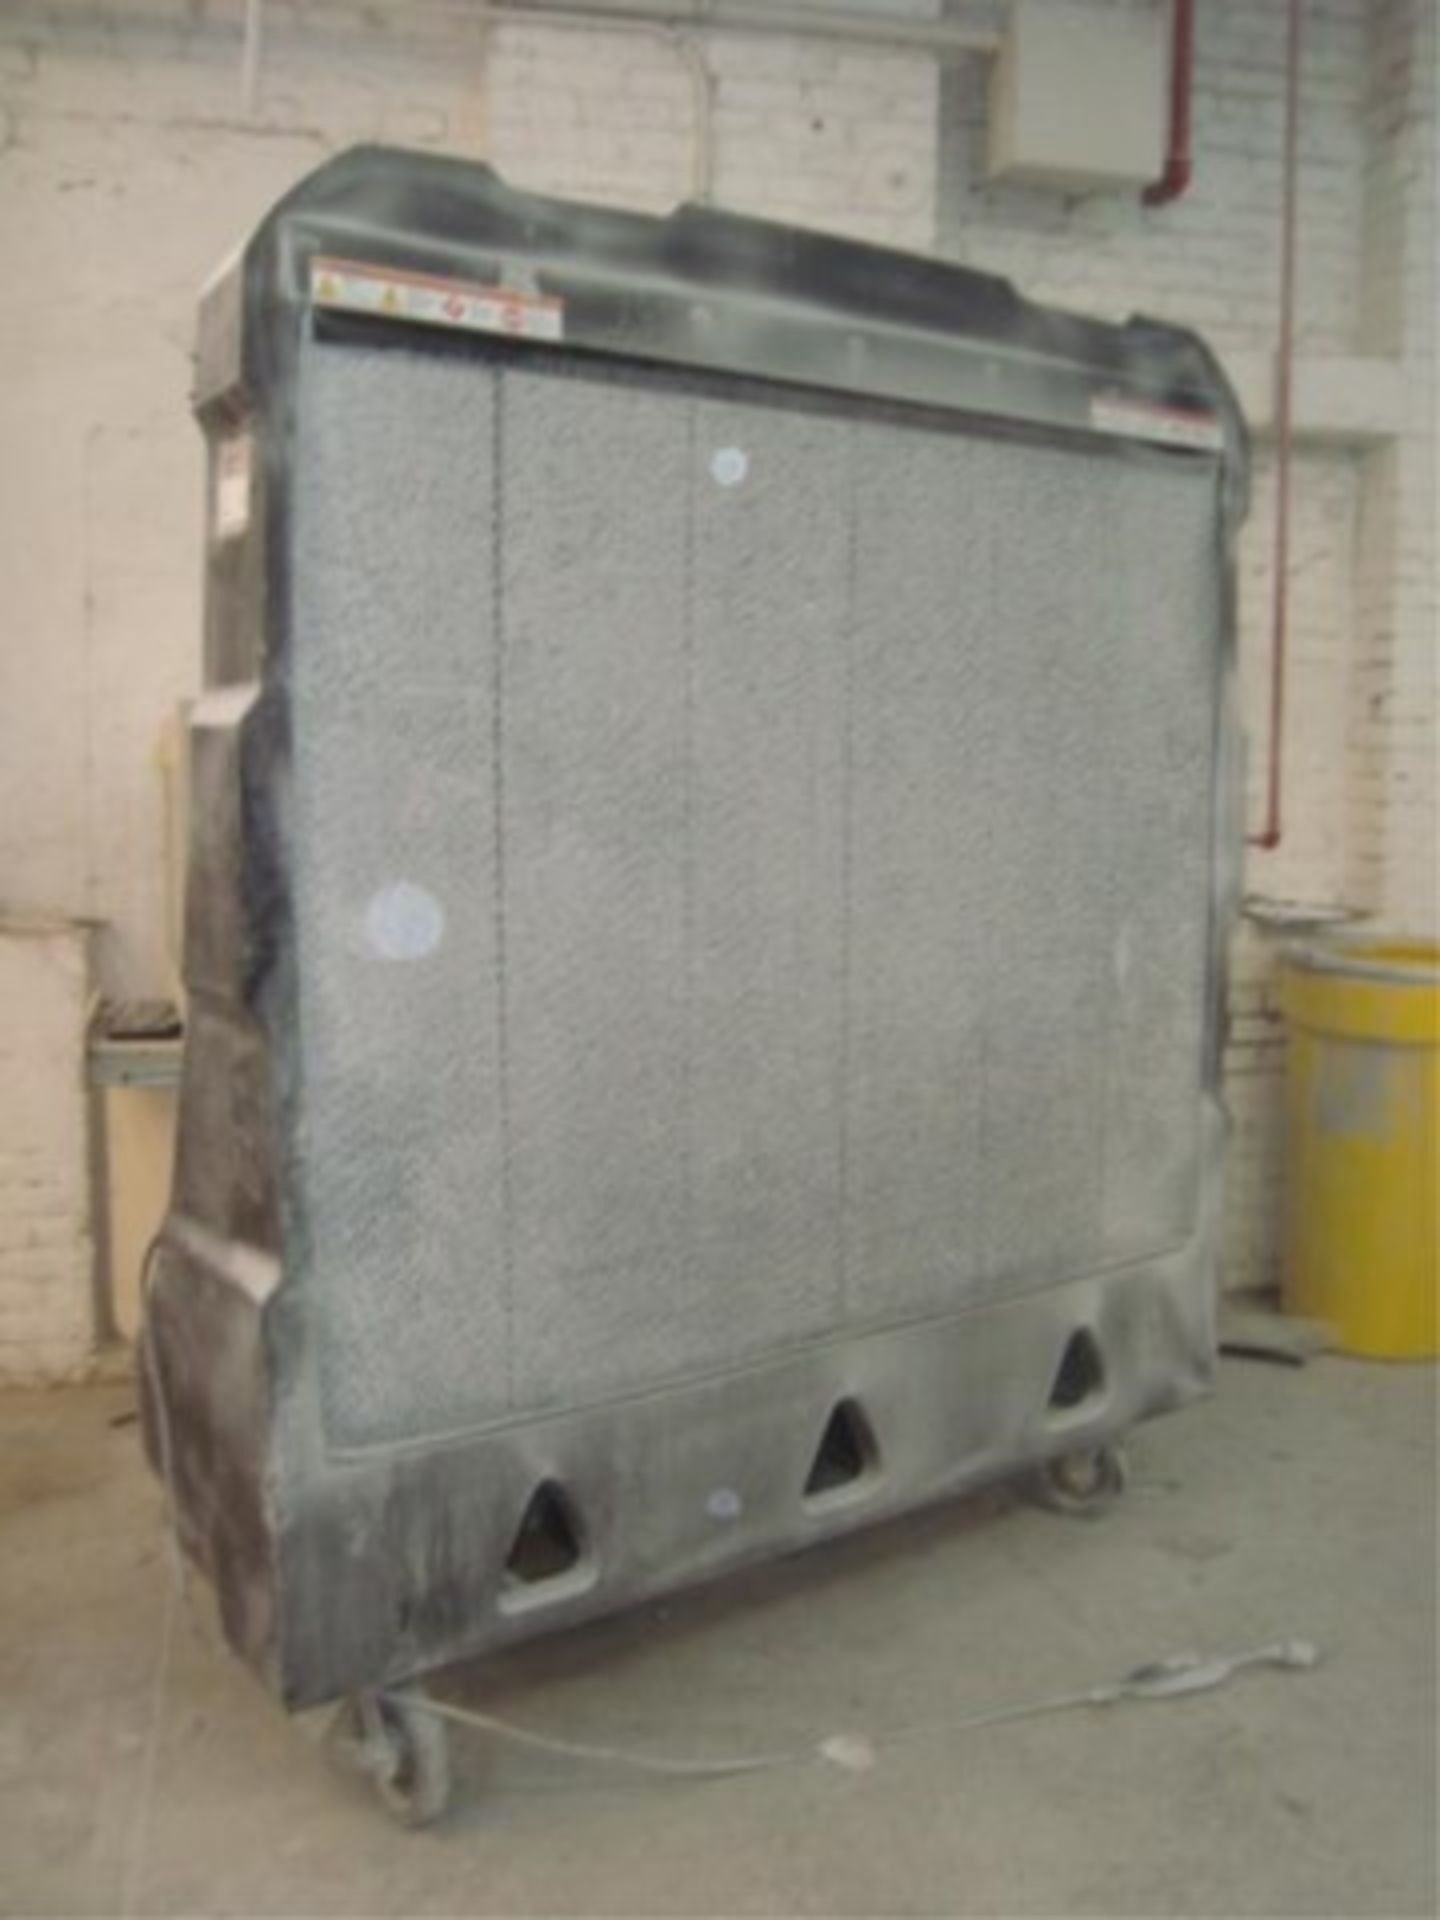 Mobile Evaporative Air Cooler System - Image 4 of 5